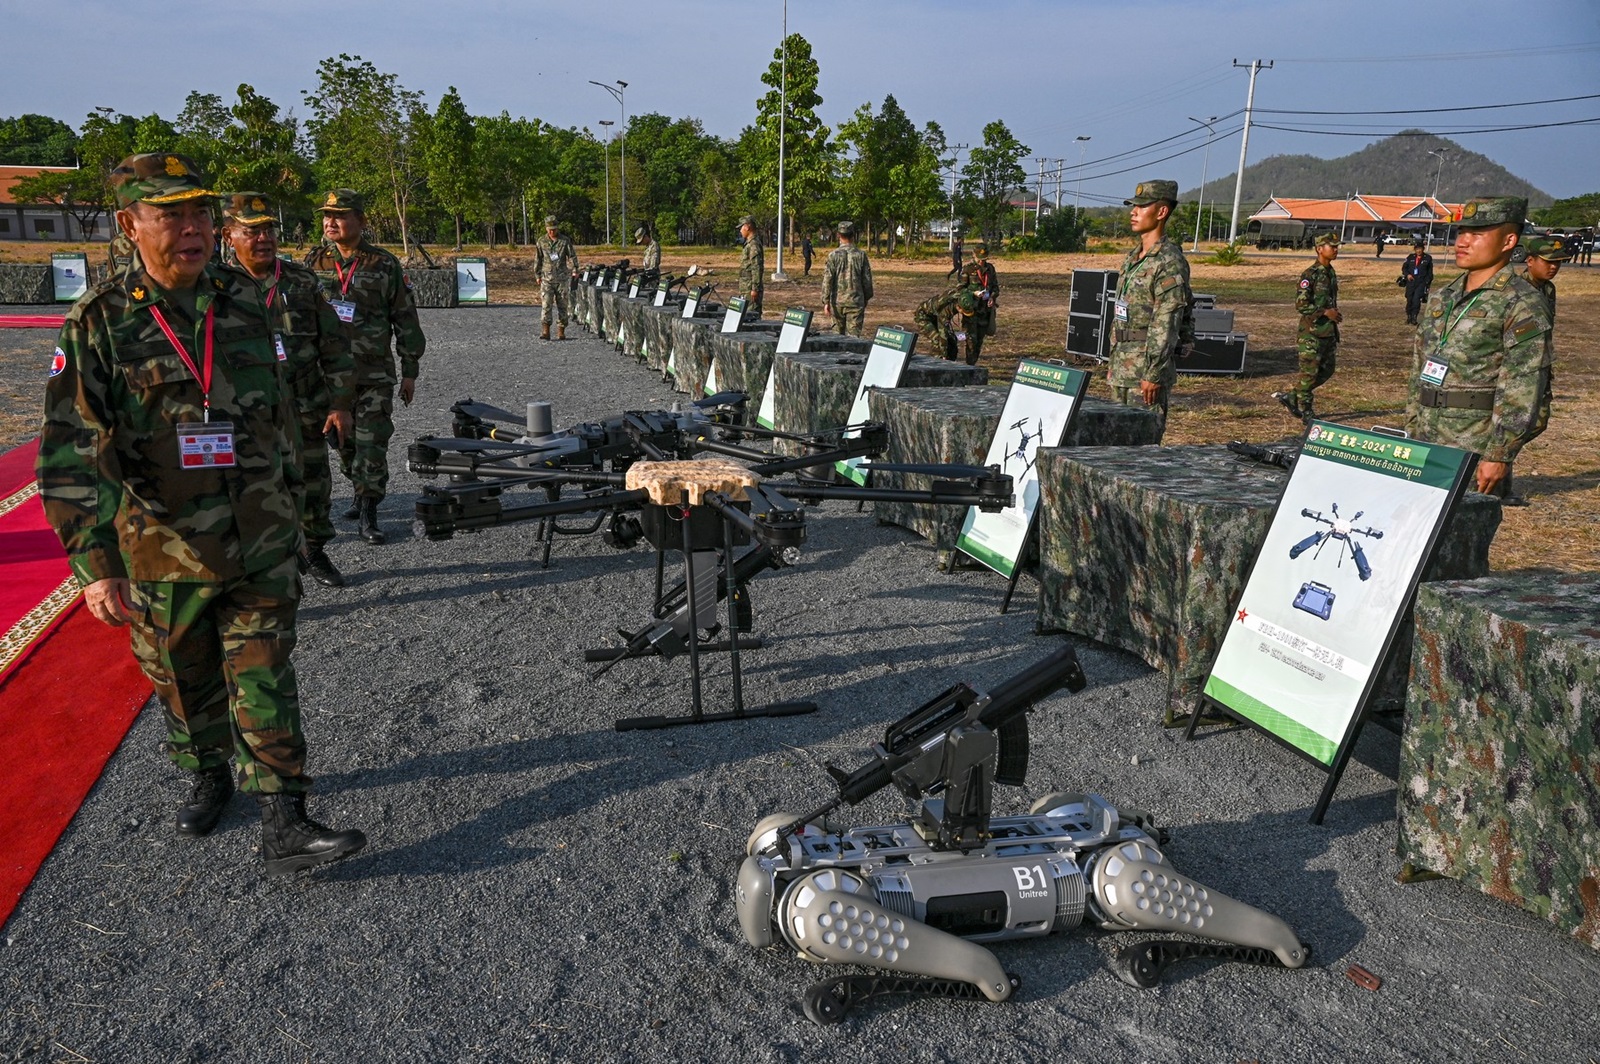 Deputy Commander-in-Chief of the Royal Cambodian Armed Forces and commander of the Royal Cambodian Army, General Mao Sophan (L), inspects drones and a machine gun equipped robot battle "dog" (R) displayed in front of Chinese soldiers during the Cambodian-Chinese Dragon Gold-2024 drill at a military police base in Kampong Chhnang province on May 16, 2024. Cambodia and China began their largest-ever joint annual military drills on May 16, 2024 to boost their army capacity amid US concerns that Beijing could use a key Cambodian naval base to expand its influence in the region.,Image: 873403442, License: Rights-managed, Restrictions: , Model Release: no, Credit line: TANG CHHIN SOTHY / AFP / Profimedia